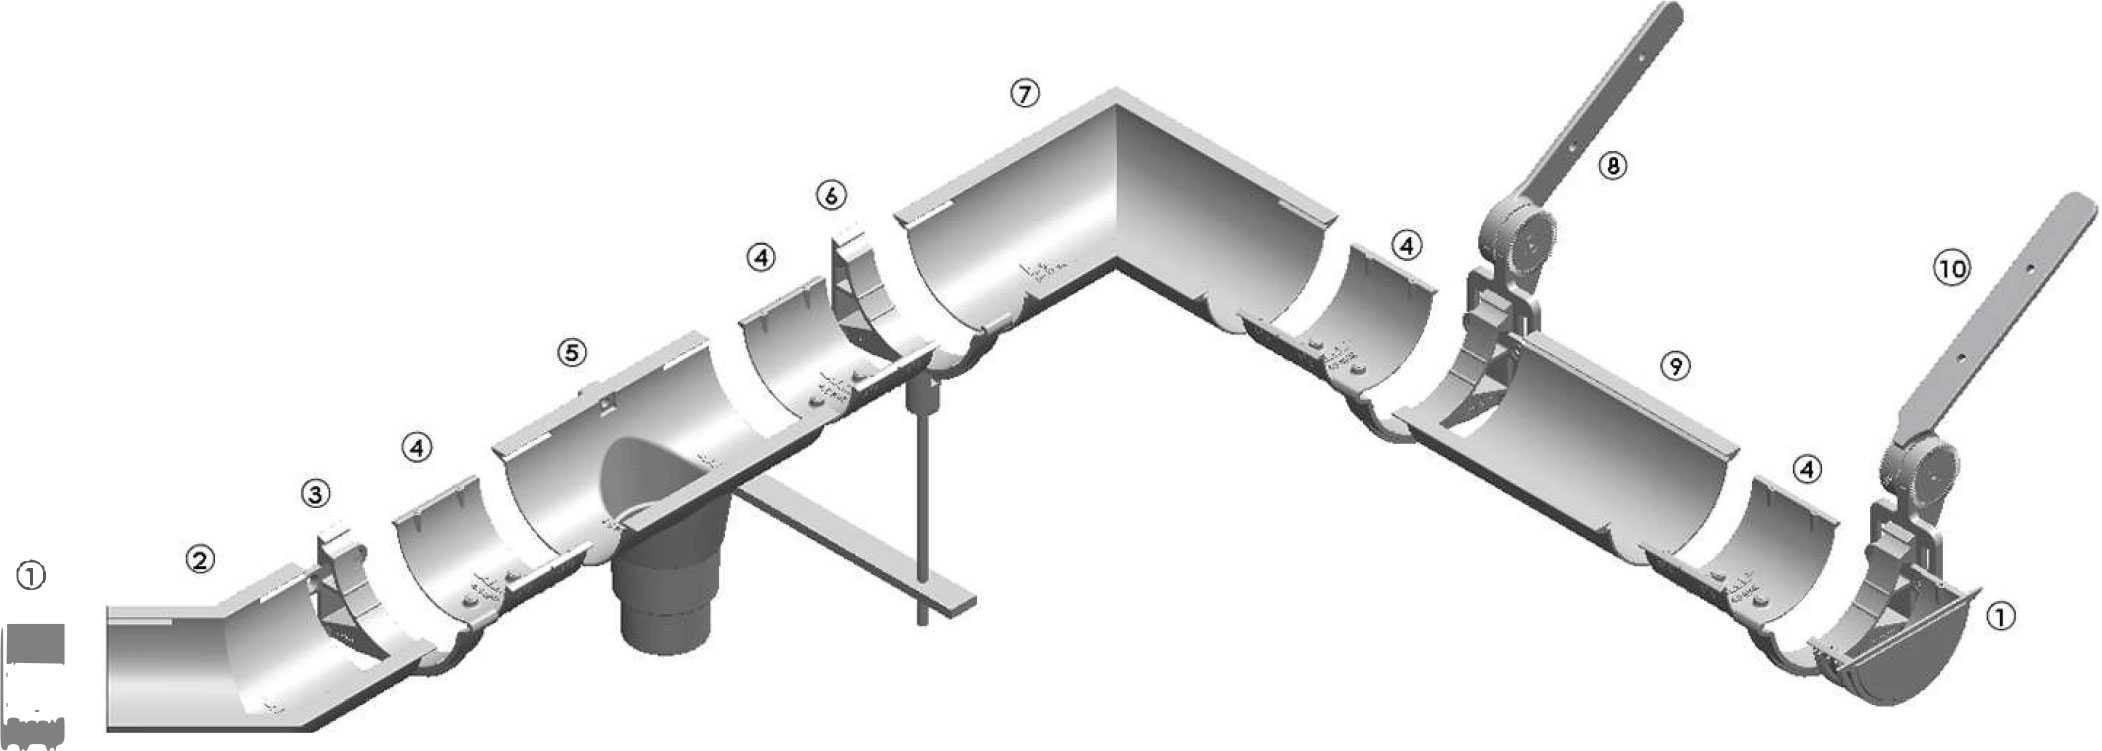 Extruded System Overview